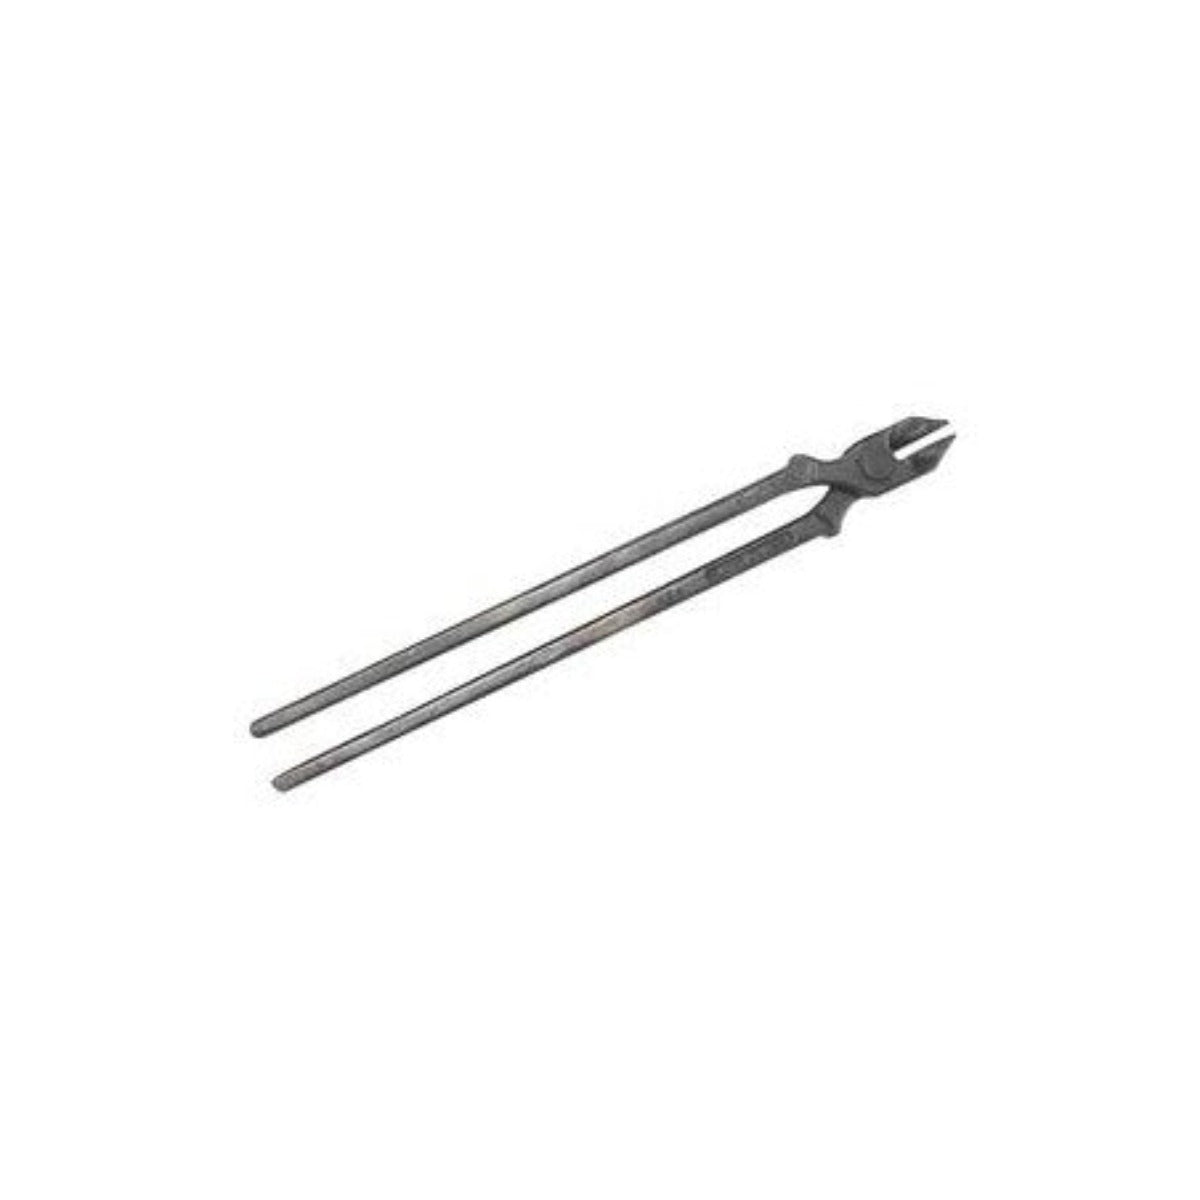 Bloom Forge Tongs 8mm